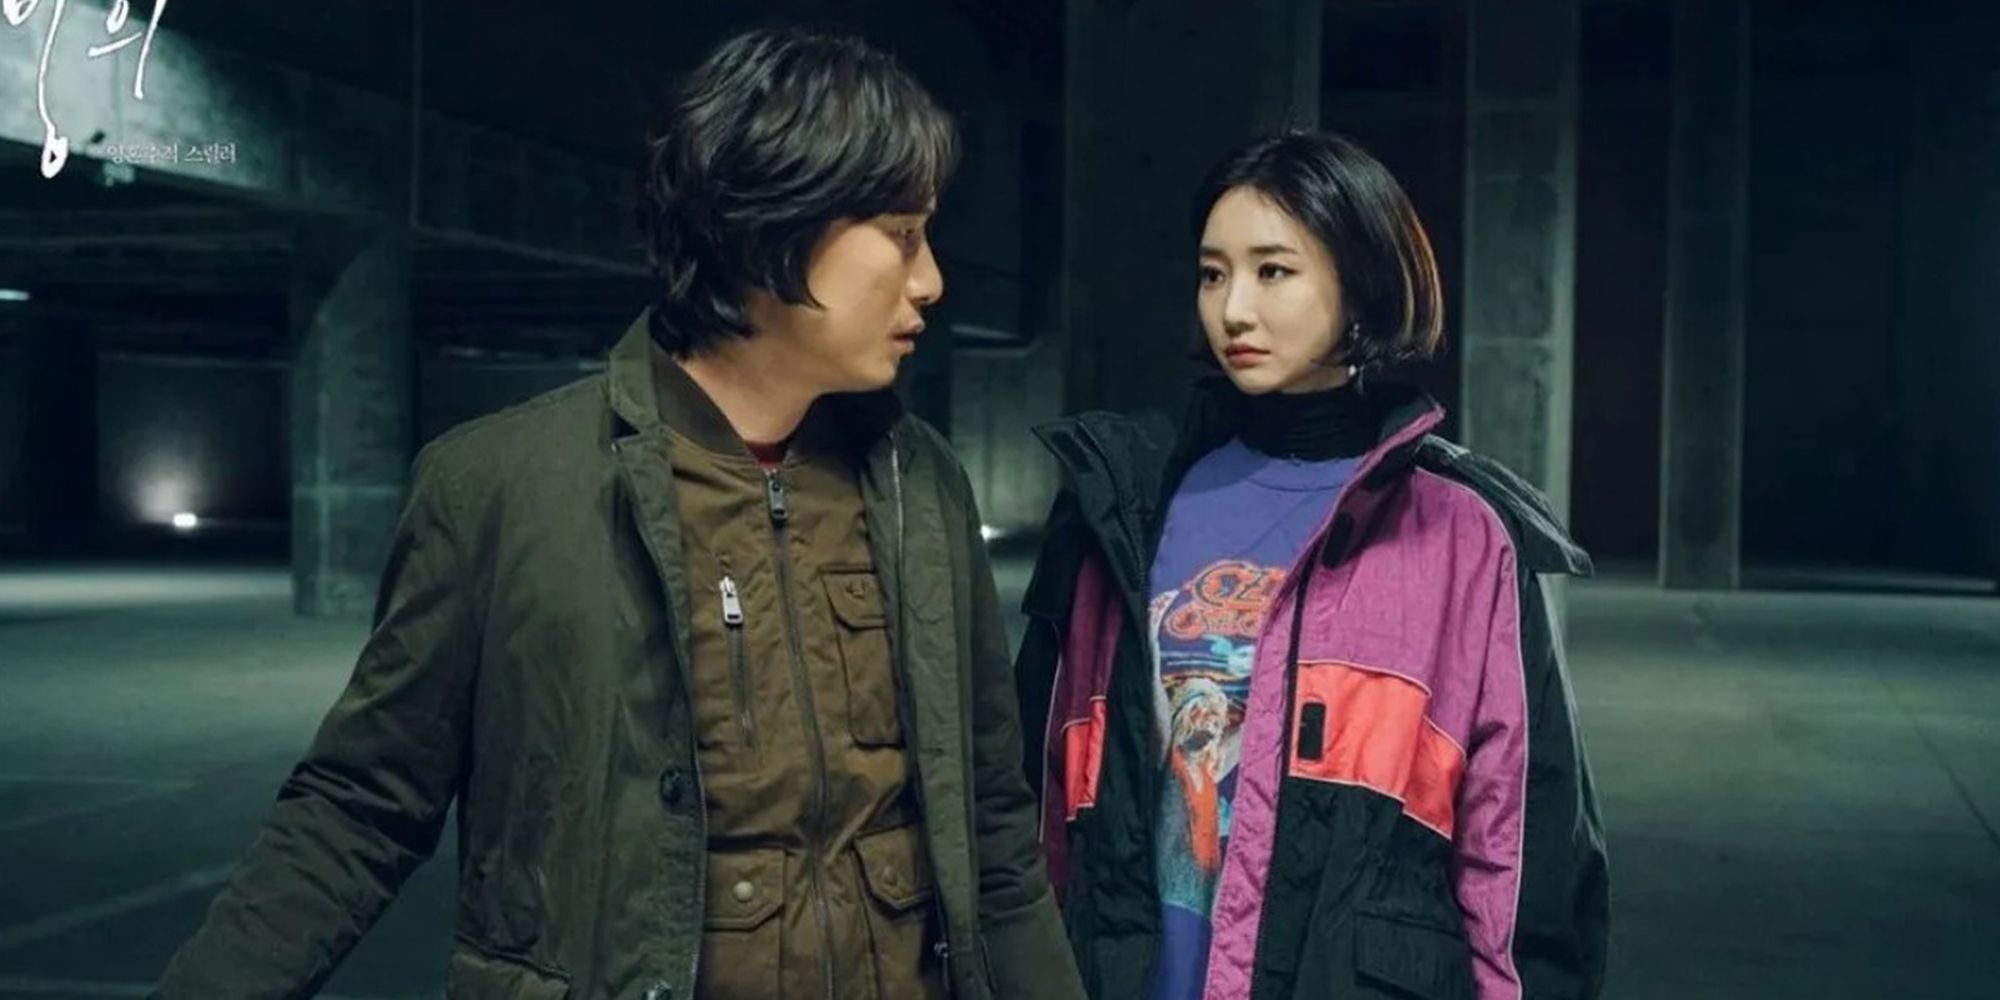 Song Sae-byeok as Kang Pil-sung and Go Joon-hee as Hong Seo-jung in Possessed